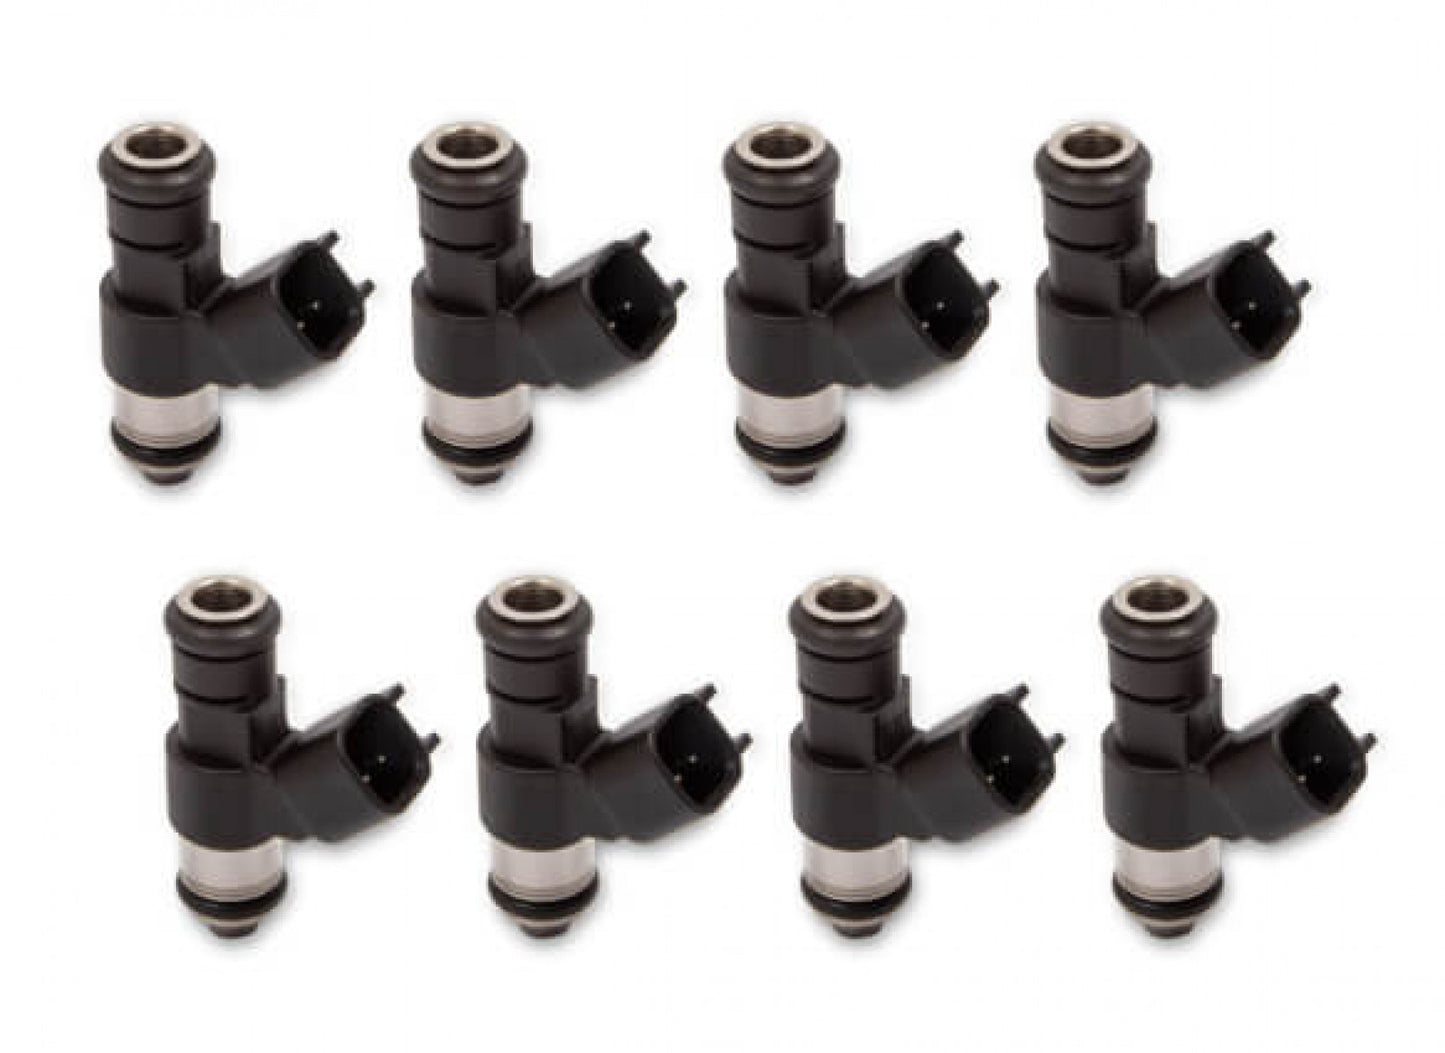 Holley EFI Performance Fuel Injectors - Set of Eight 3522-108X